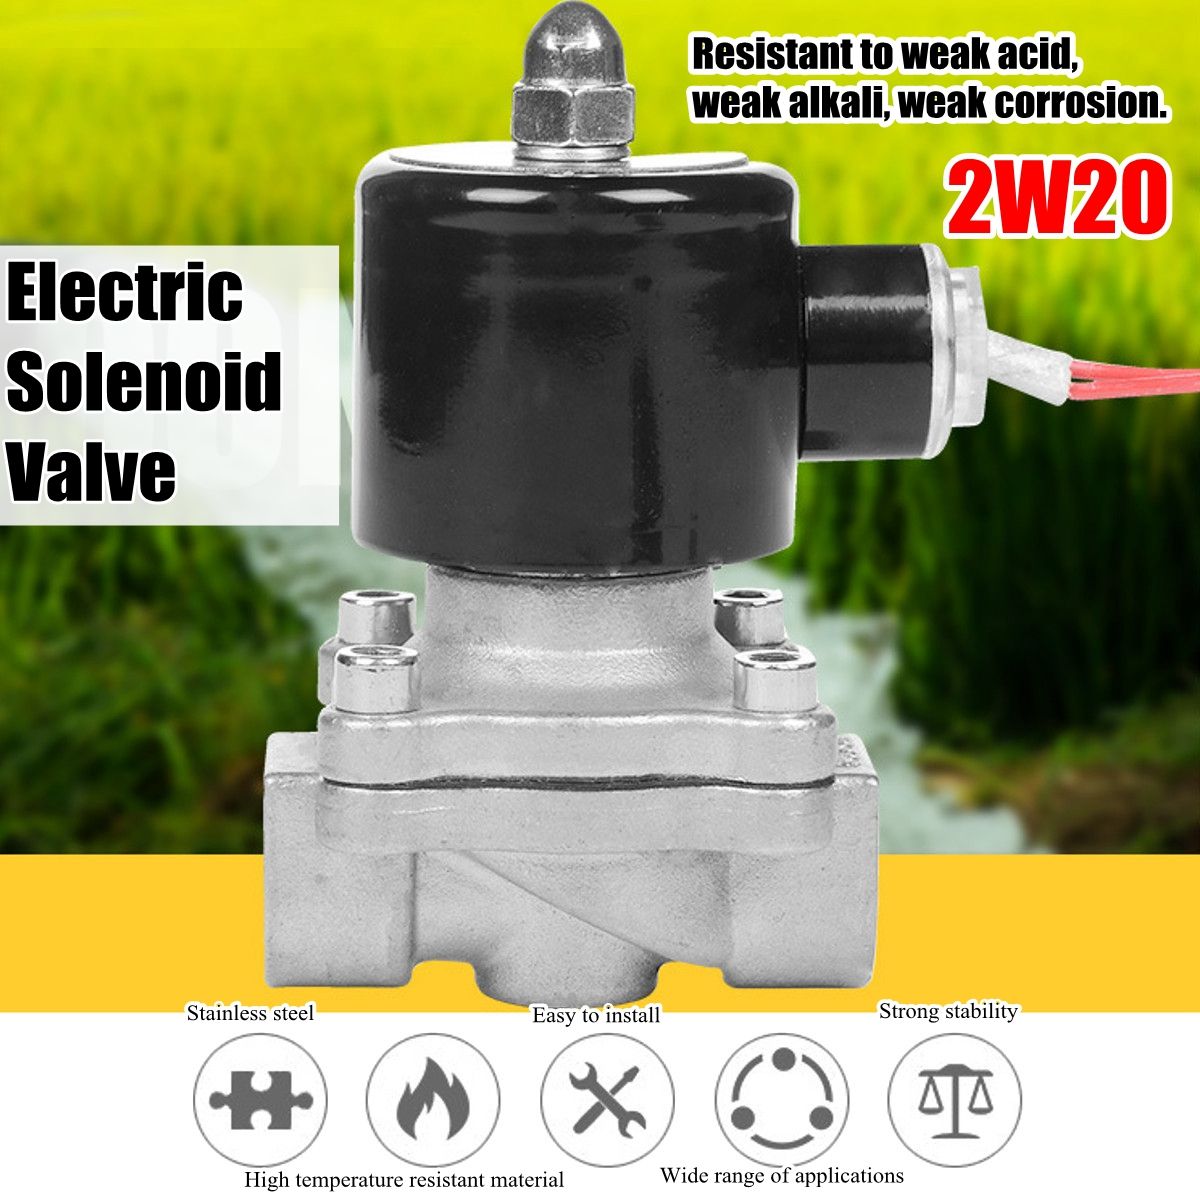 AC-220V-Electric-Solenoid-Valve-2W20-Stainless-Steel-For-Water-Gas-Air-Oil-1346635